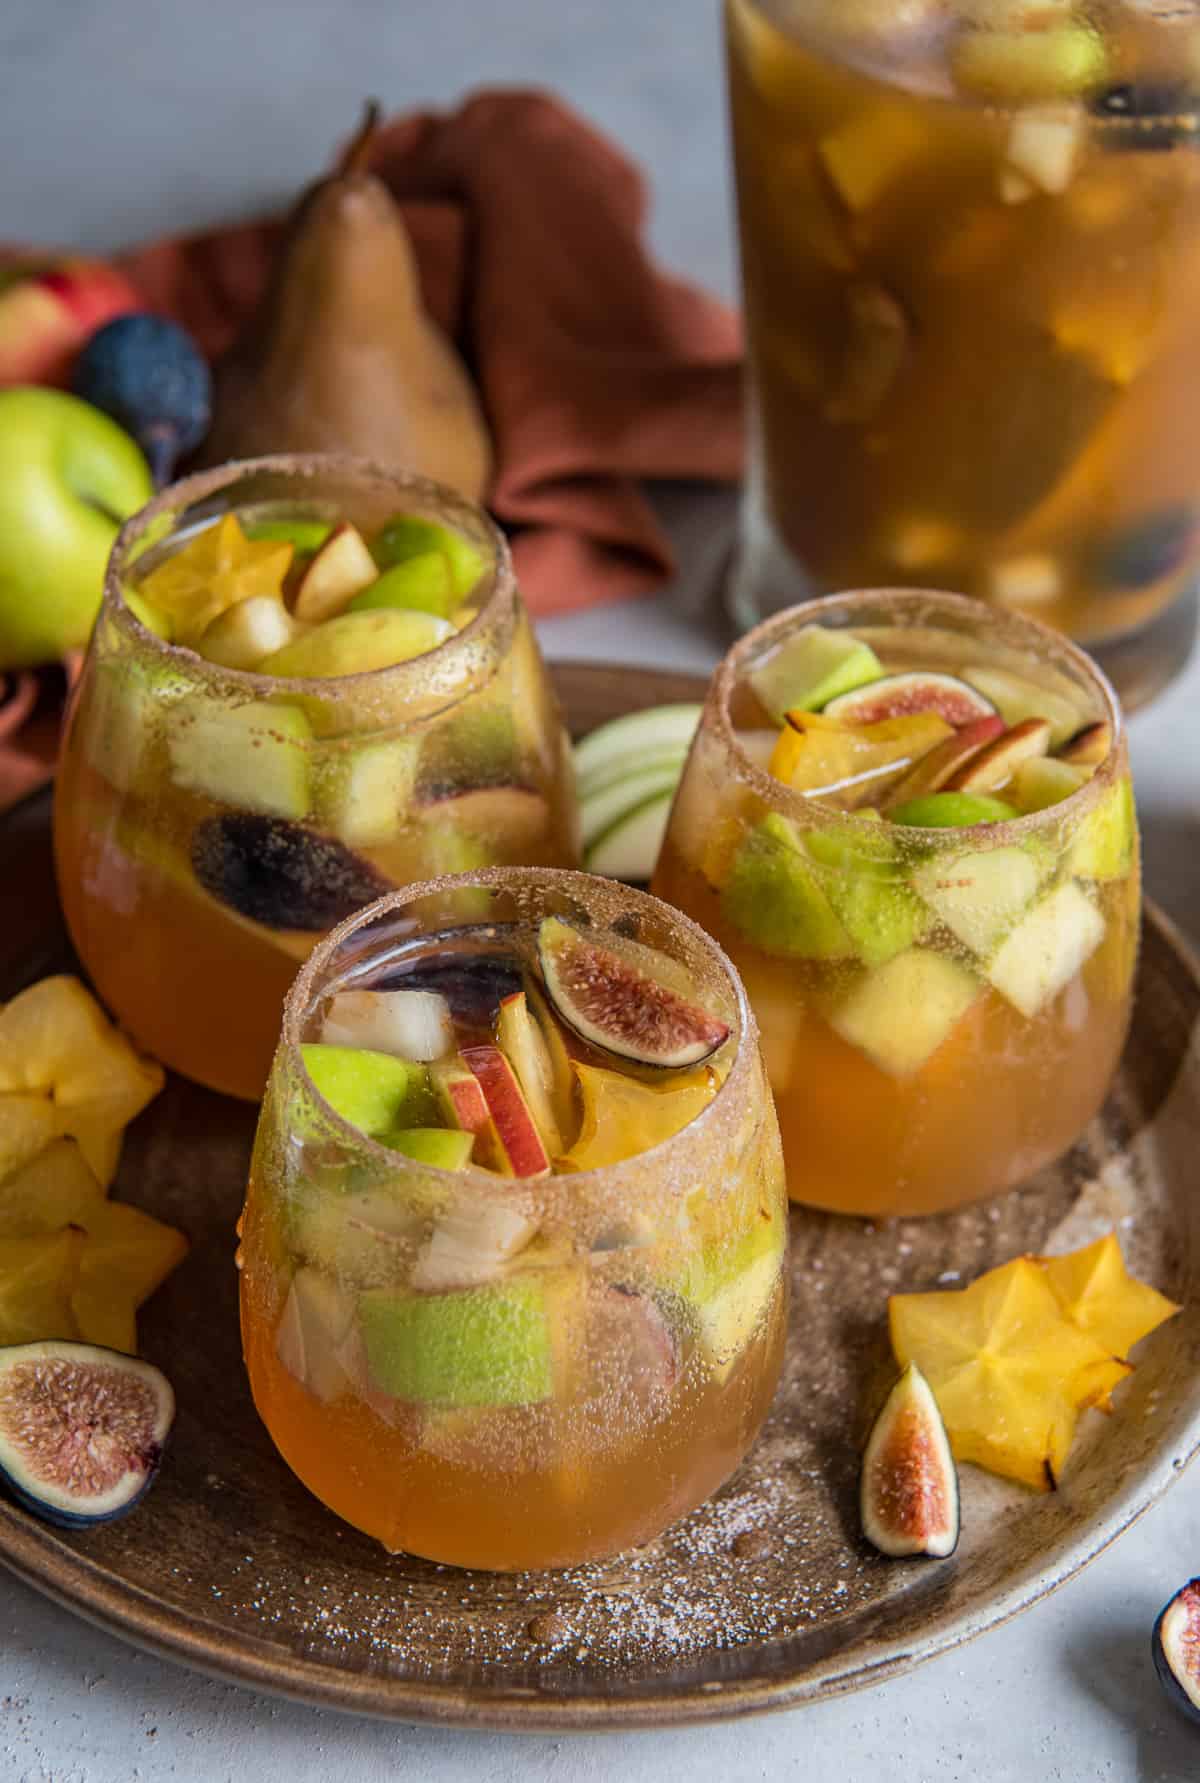 Three glasses of fall sangria with fruit and pears on a plate.